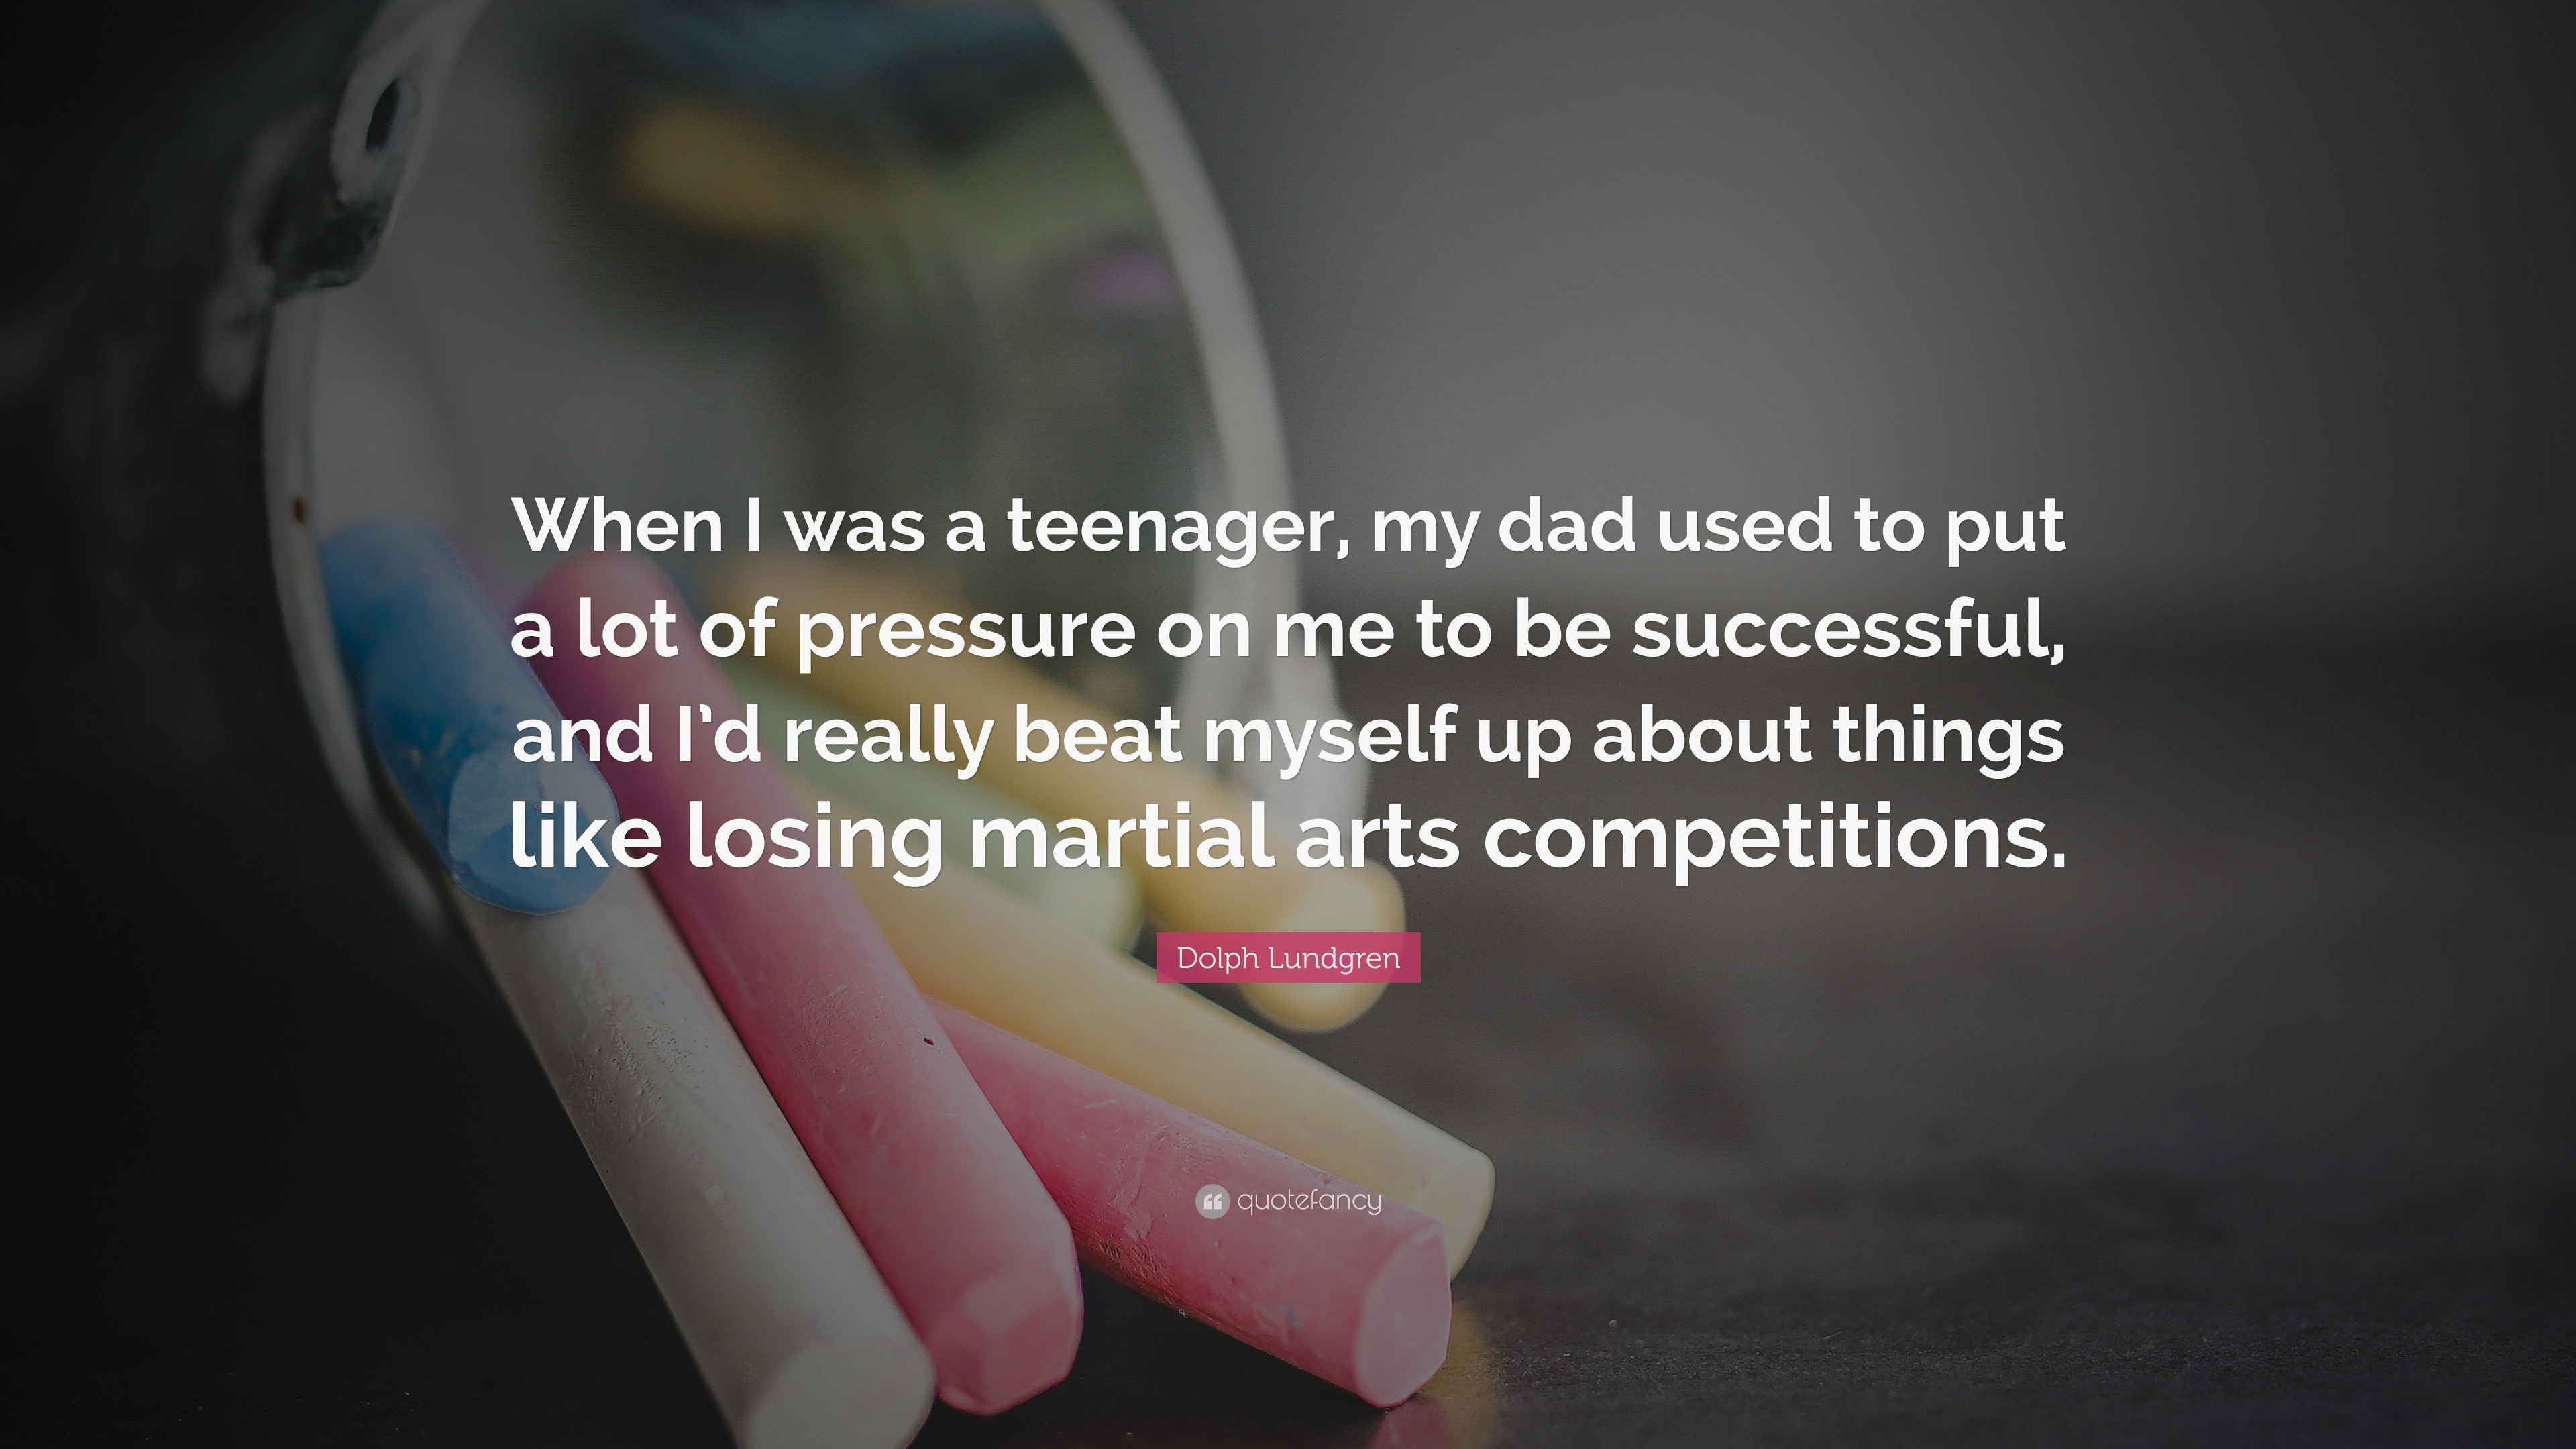 https://quotefancy.com/media/wallpaper/3840x2160/1005275-Dolph-Lundgren-Quote-When-I-was-a-teenager-my-dad-used-to-put-a.jpg